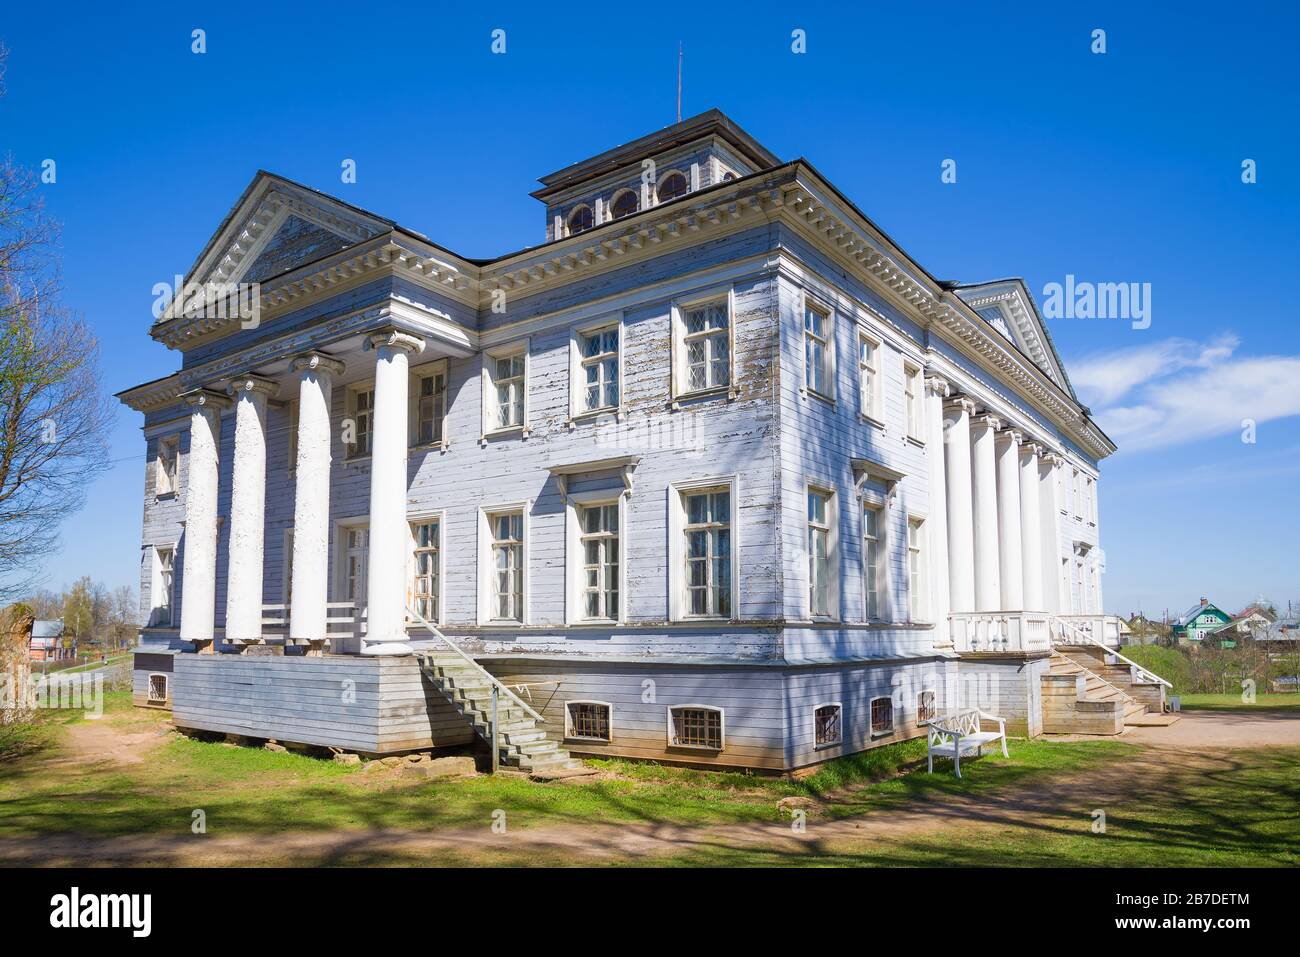 ROZHDESTVENO, RUSSIA - MAY 08, 2018: Old house of the Russian writer V. Nabokov closeup on a sunny May day Stock Photo